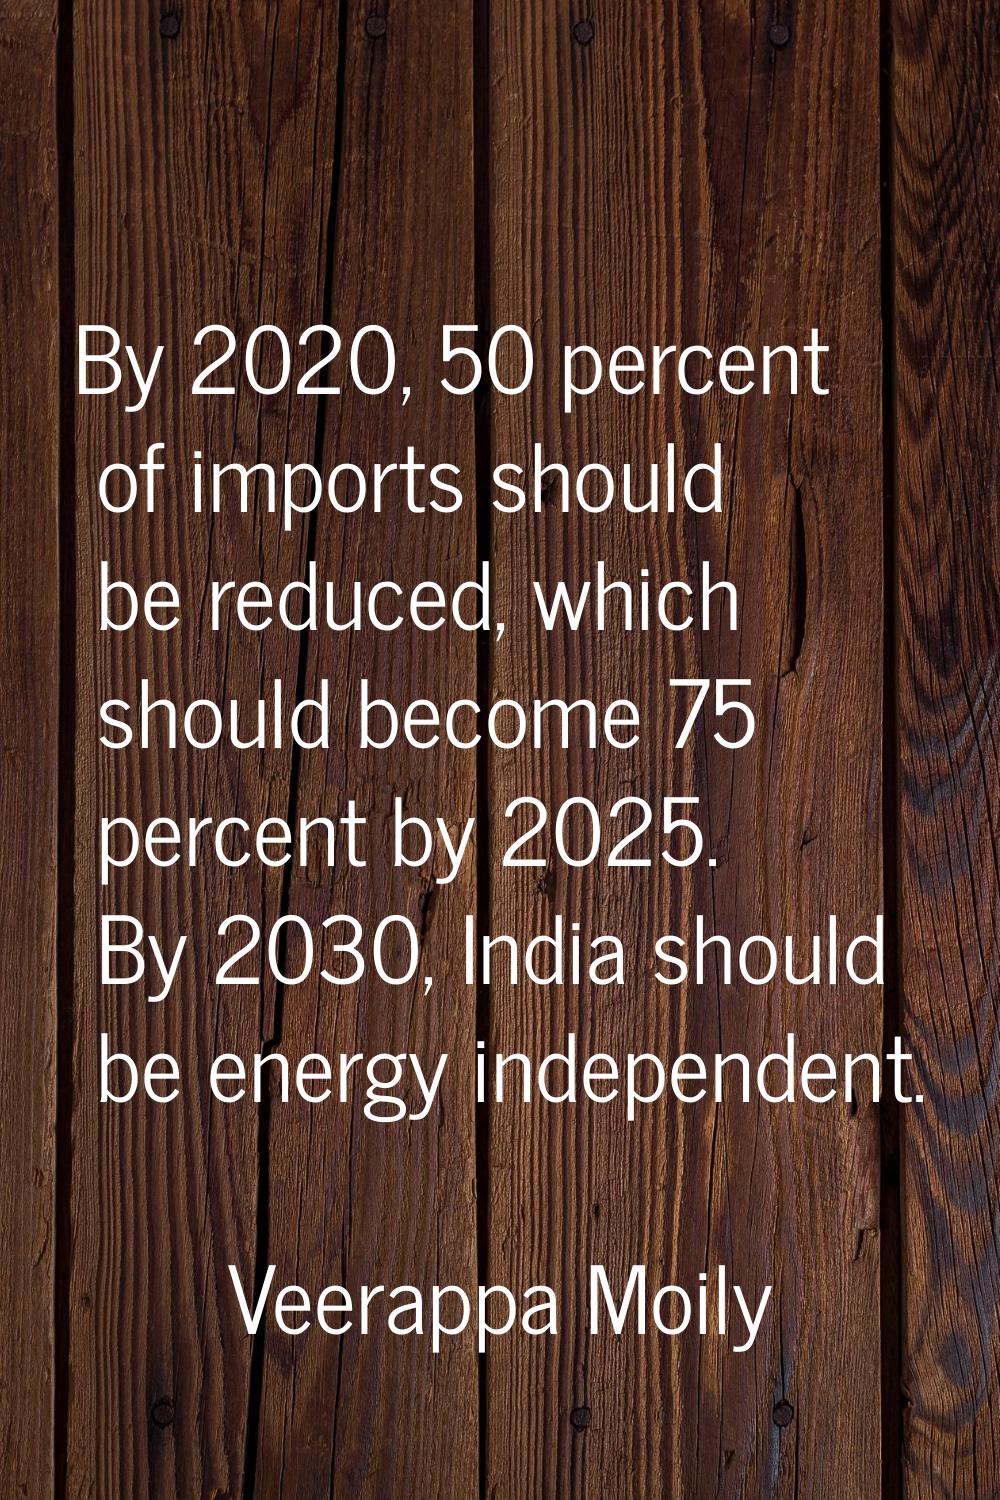 By 2020, 50 percent of imports should be reduced, which should become 75 percent by 2025. By 2030, 